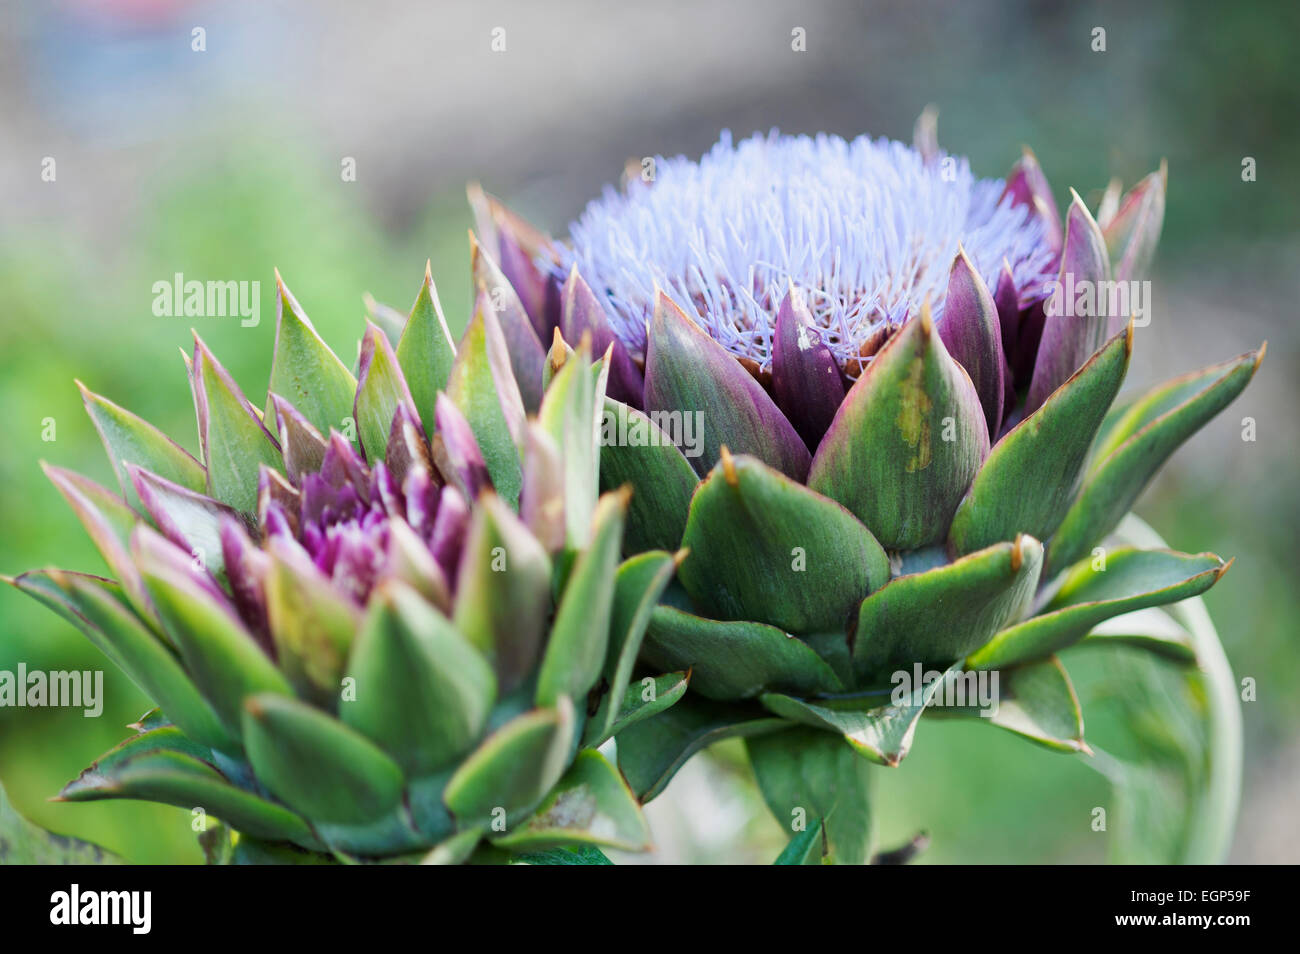 Cardoon, Cynara cardunculus. One head in full flower and one opening. Flowers are tiny purple strands surrounded by stiff green purple calyxes. Stock Photo